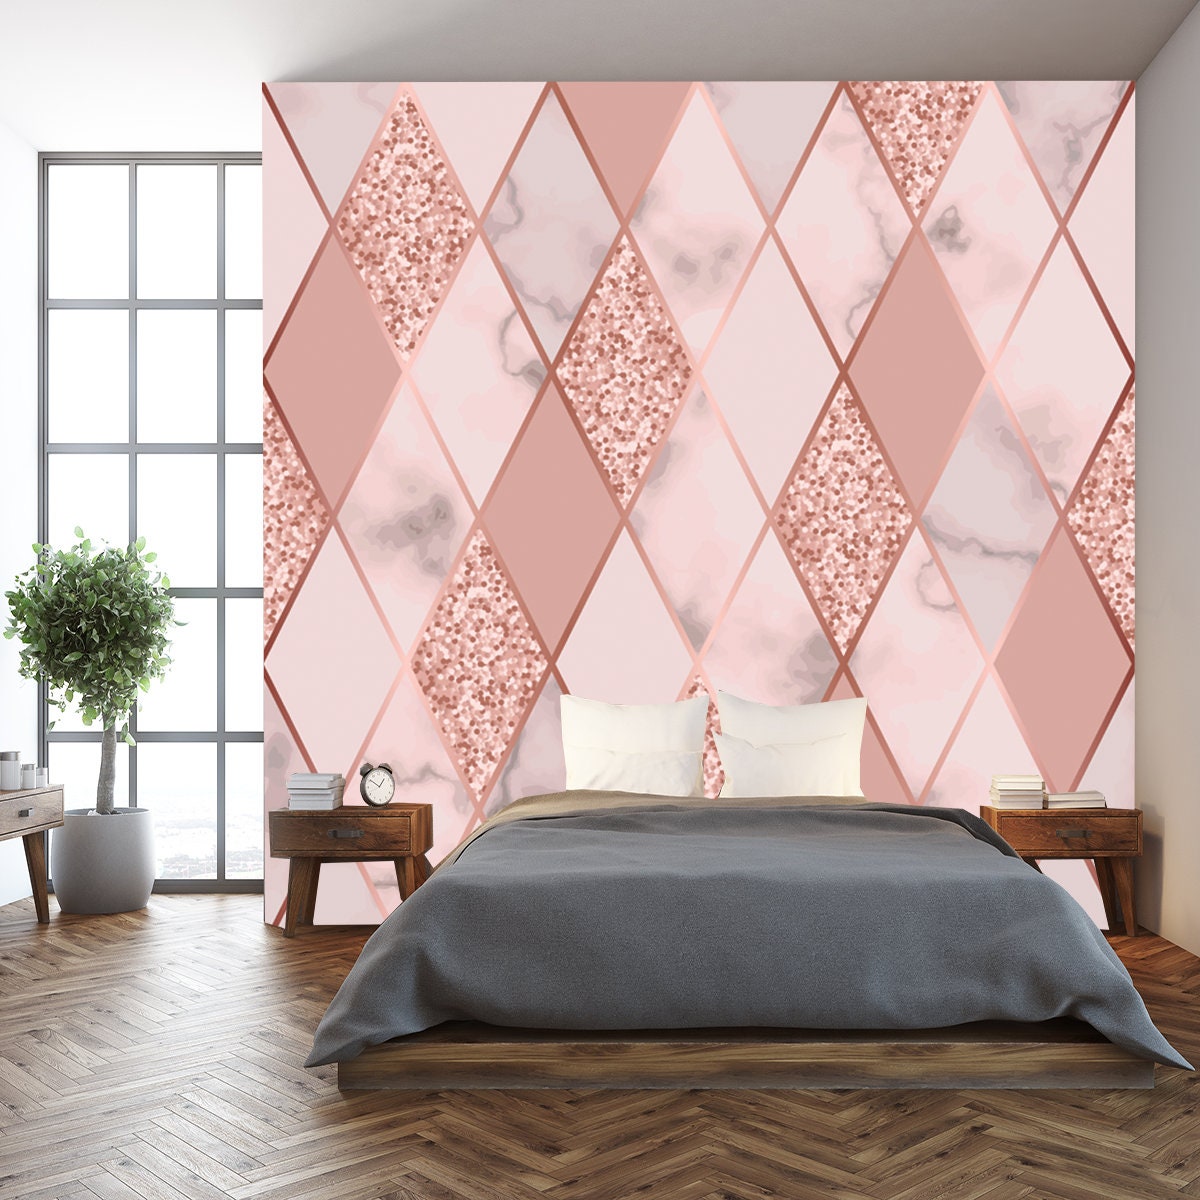 Pattern with Golden Geometric Diagonal Lines. Gold Glitter, White and Pink Rhombus Marbling Wallpaper Bedroom Mural